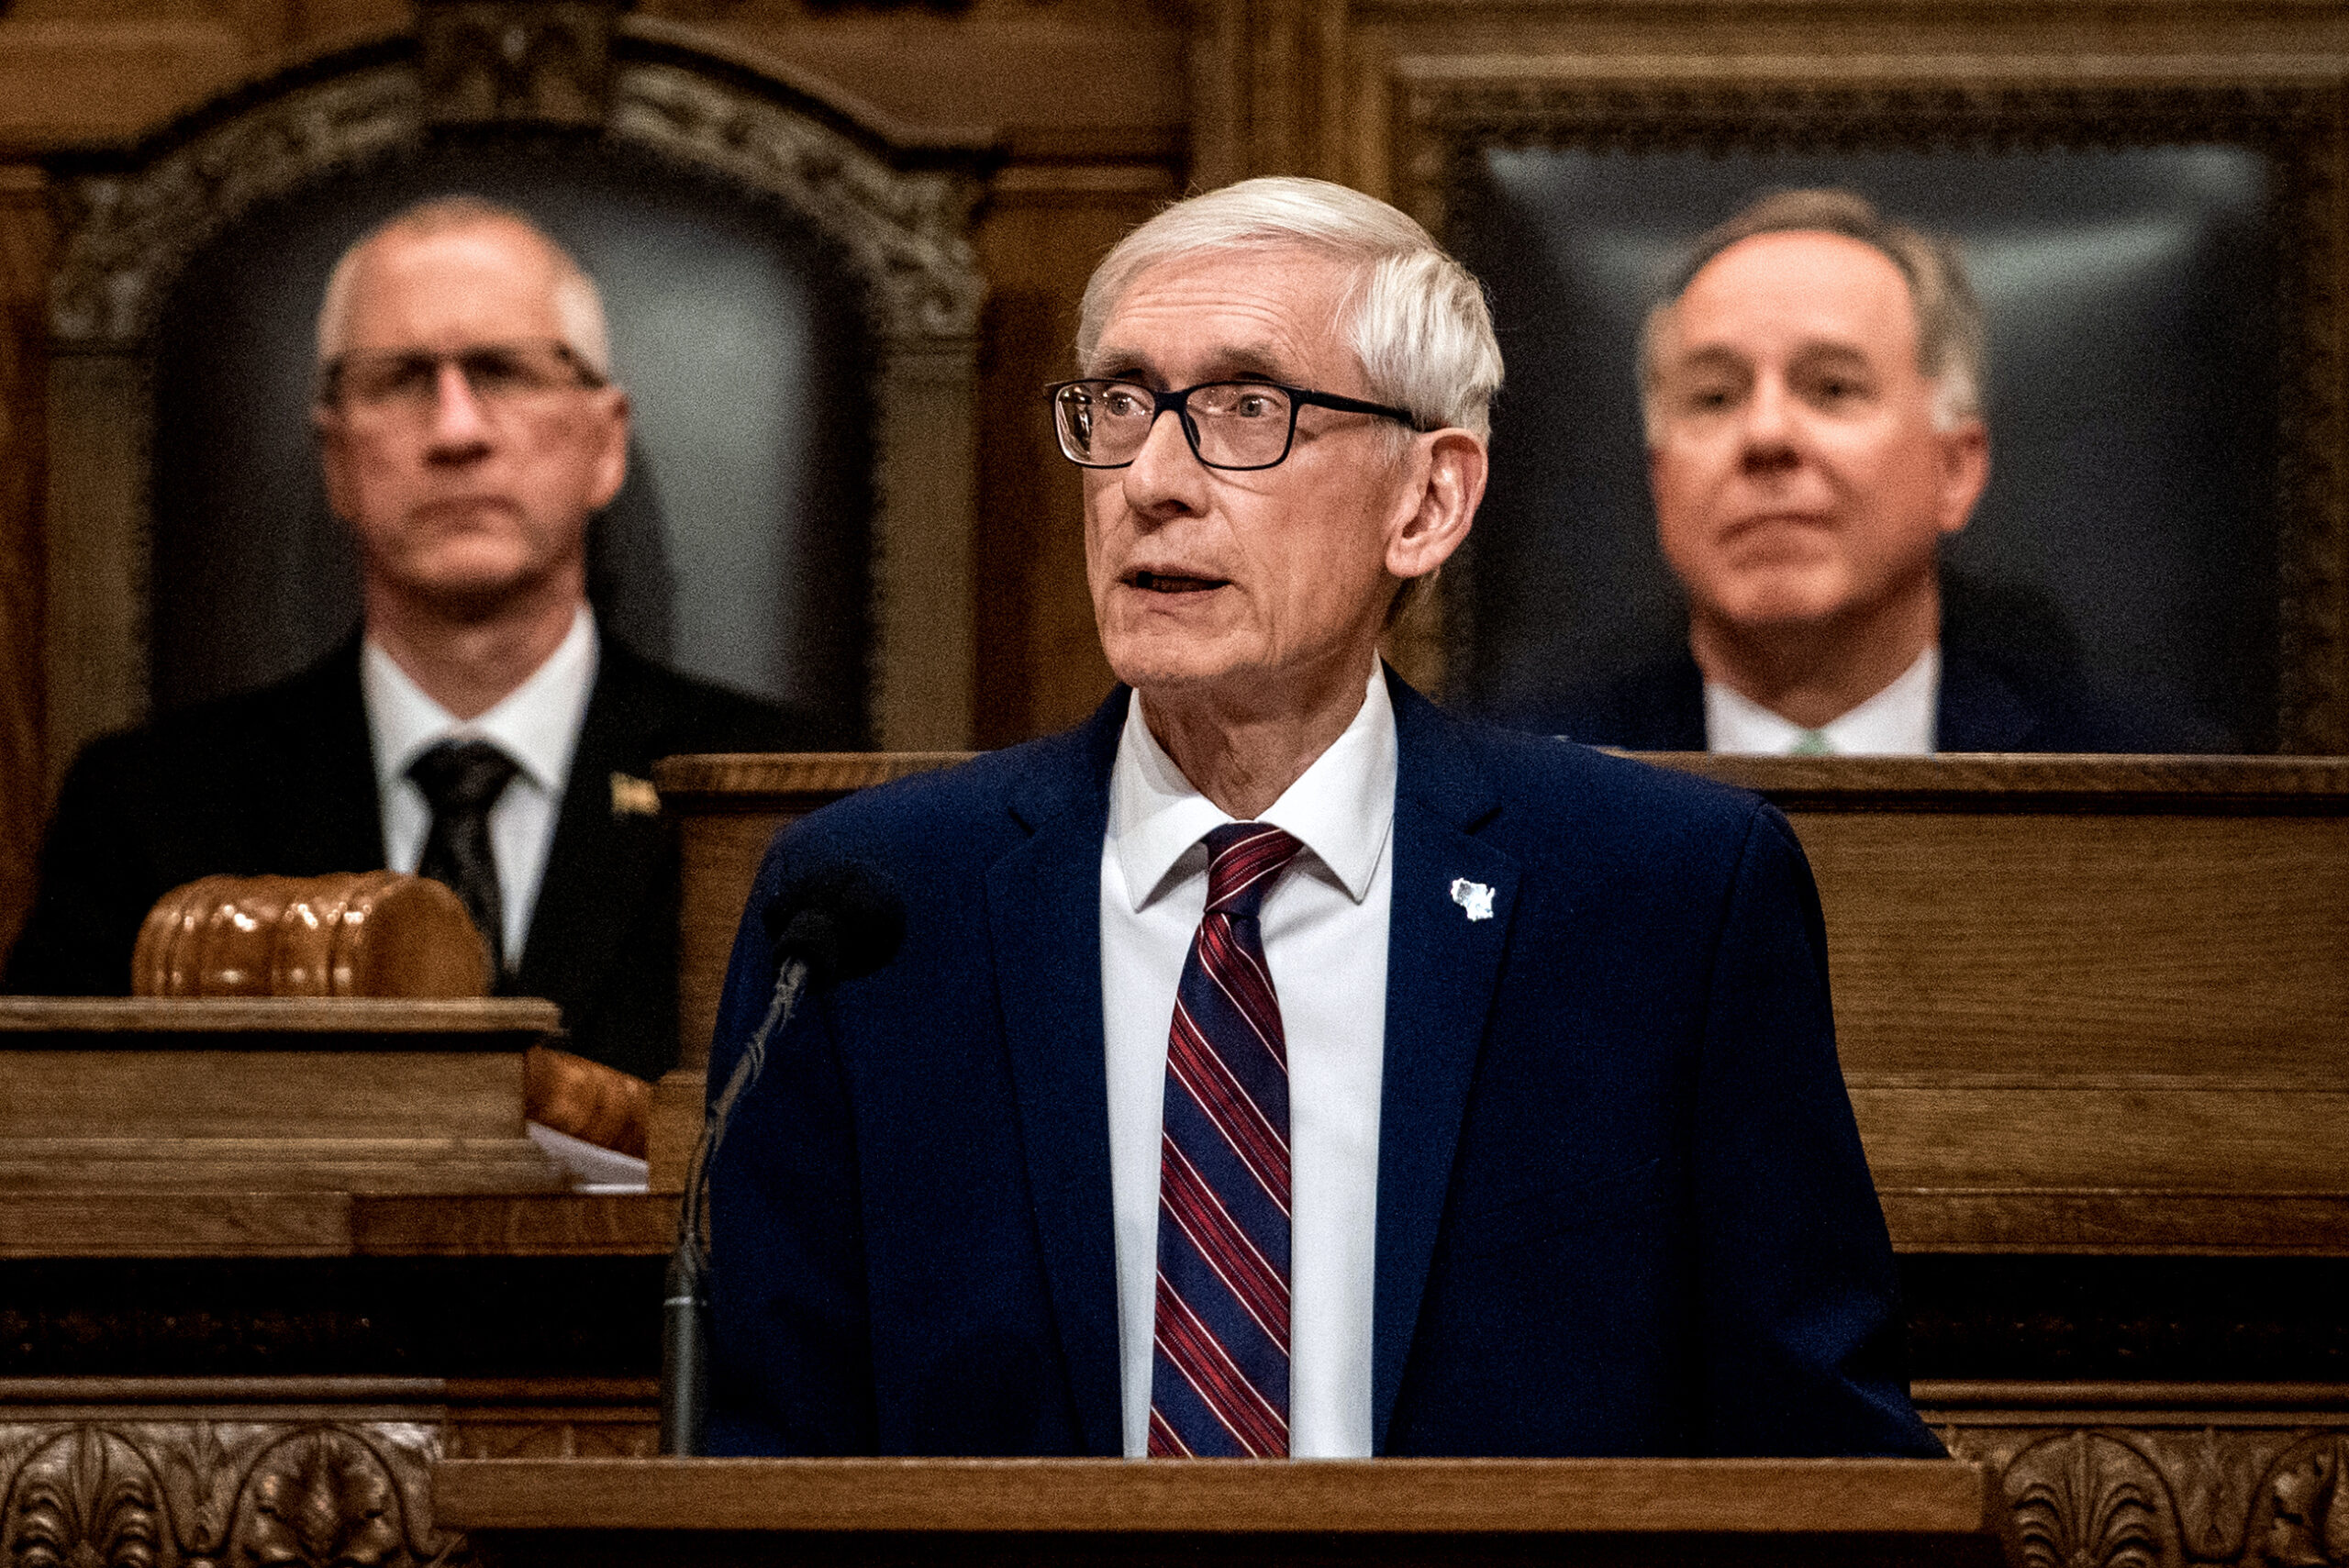 Gov. Tony Evers stands in front of the assembly and gives a speech.